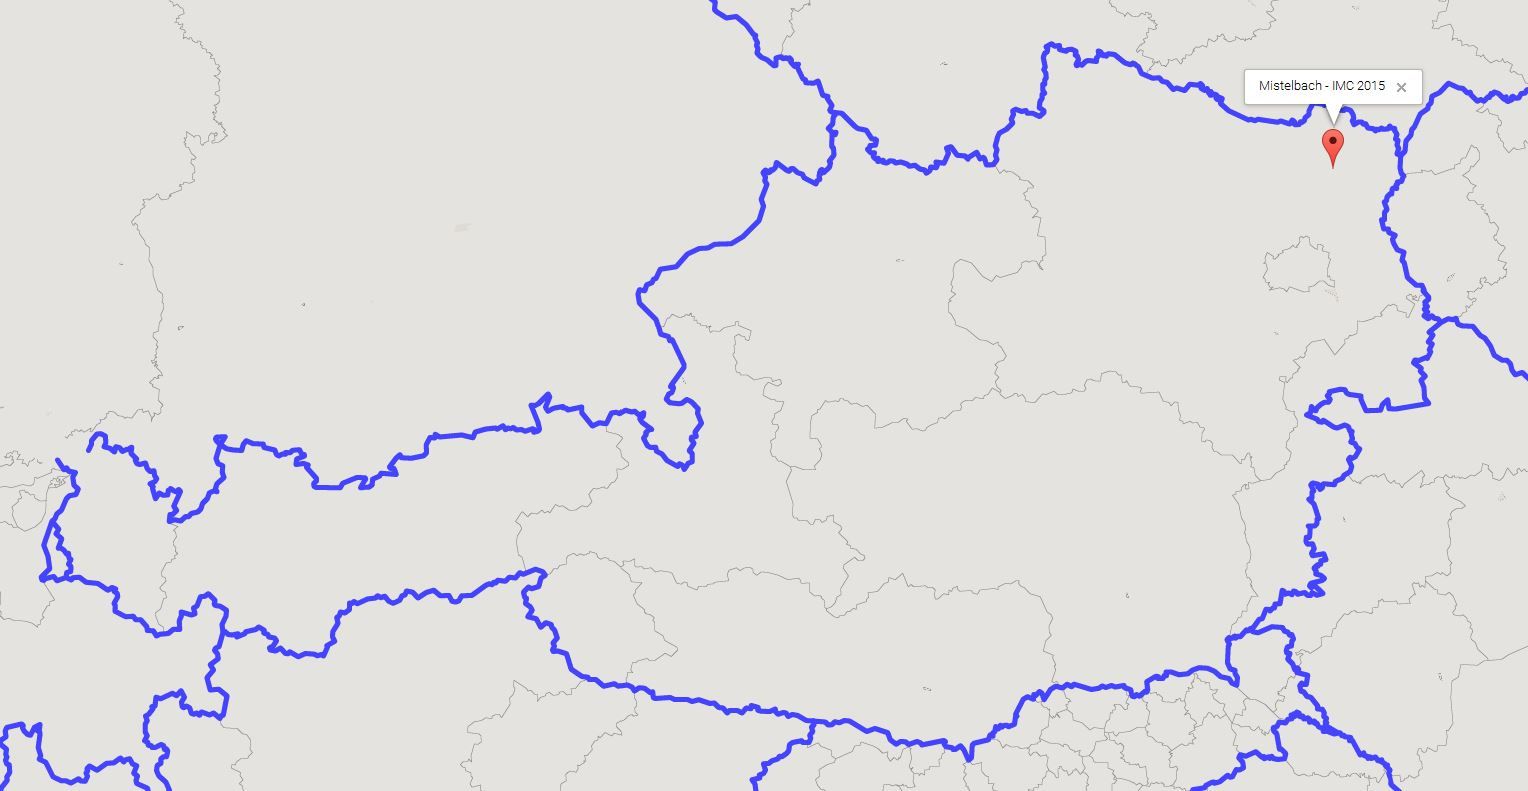 Location of Mistelbach within the boundaries of Austria